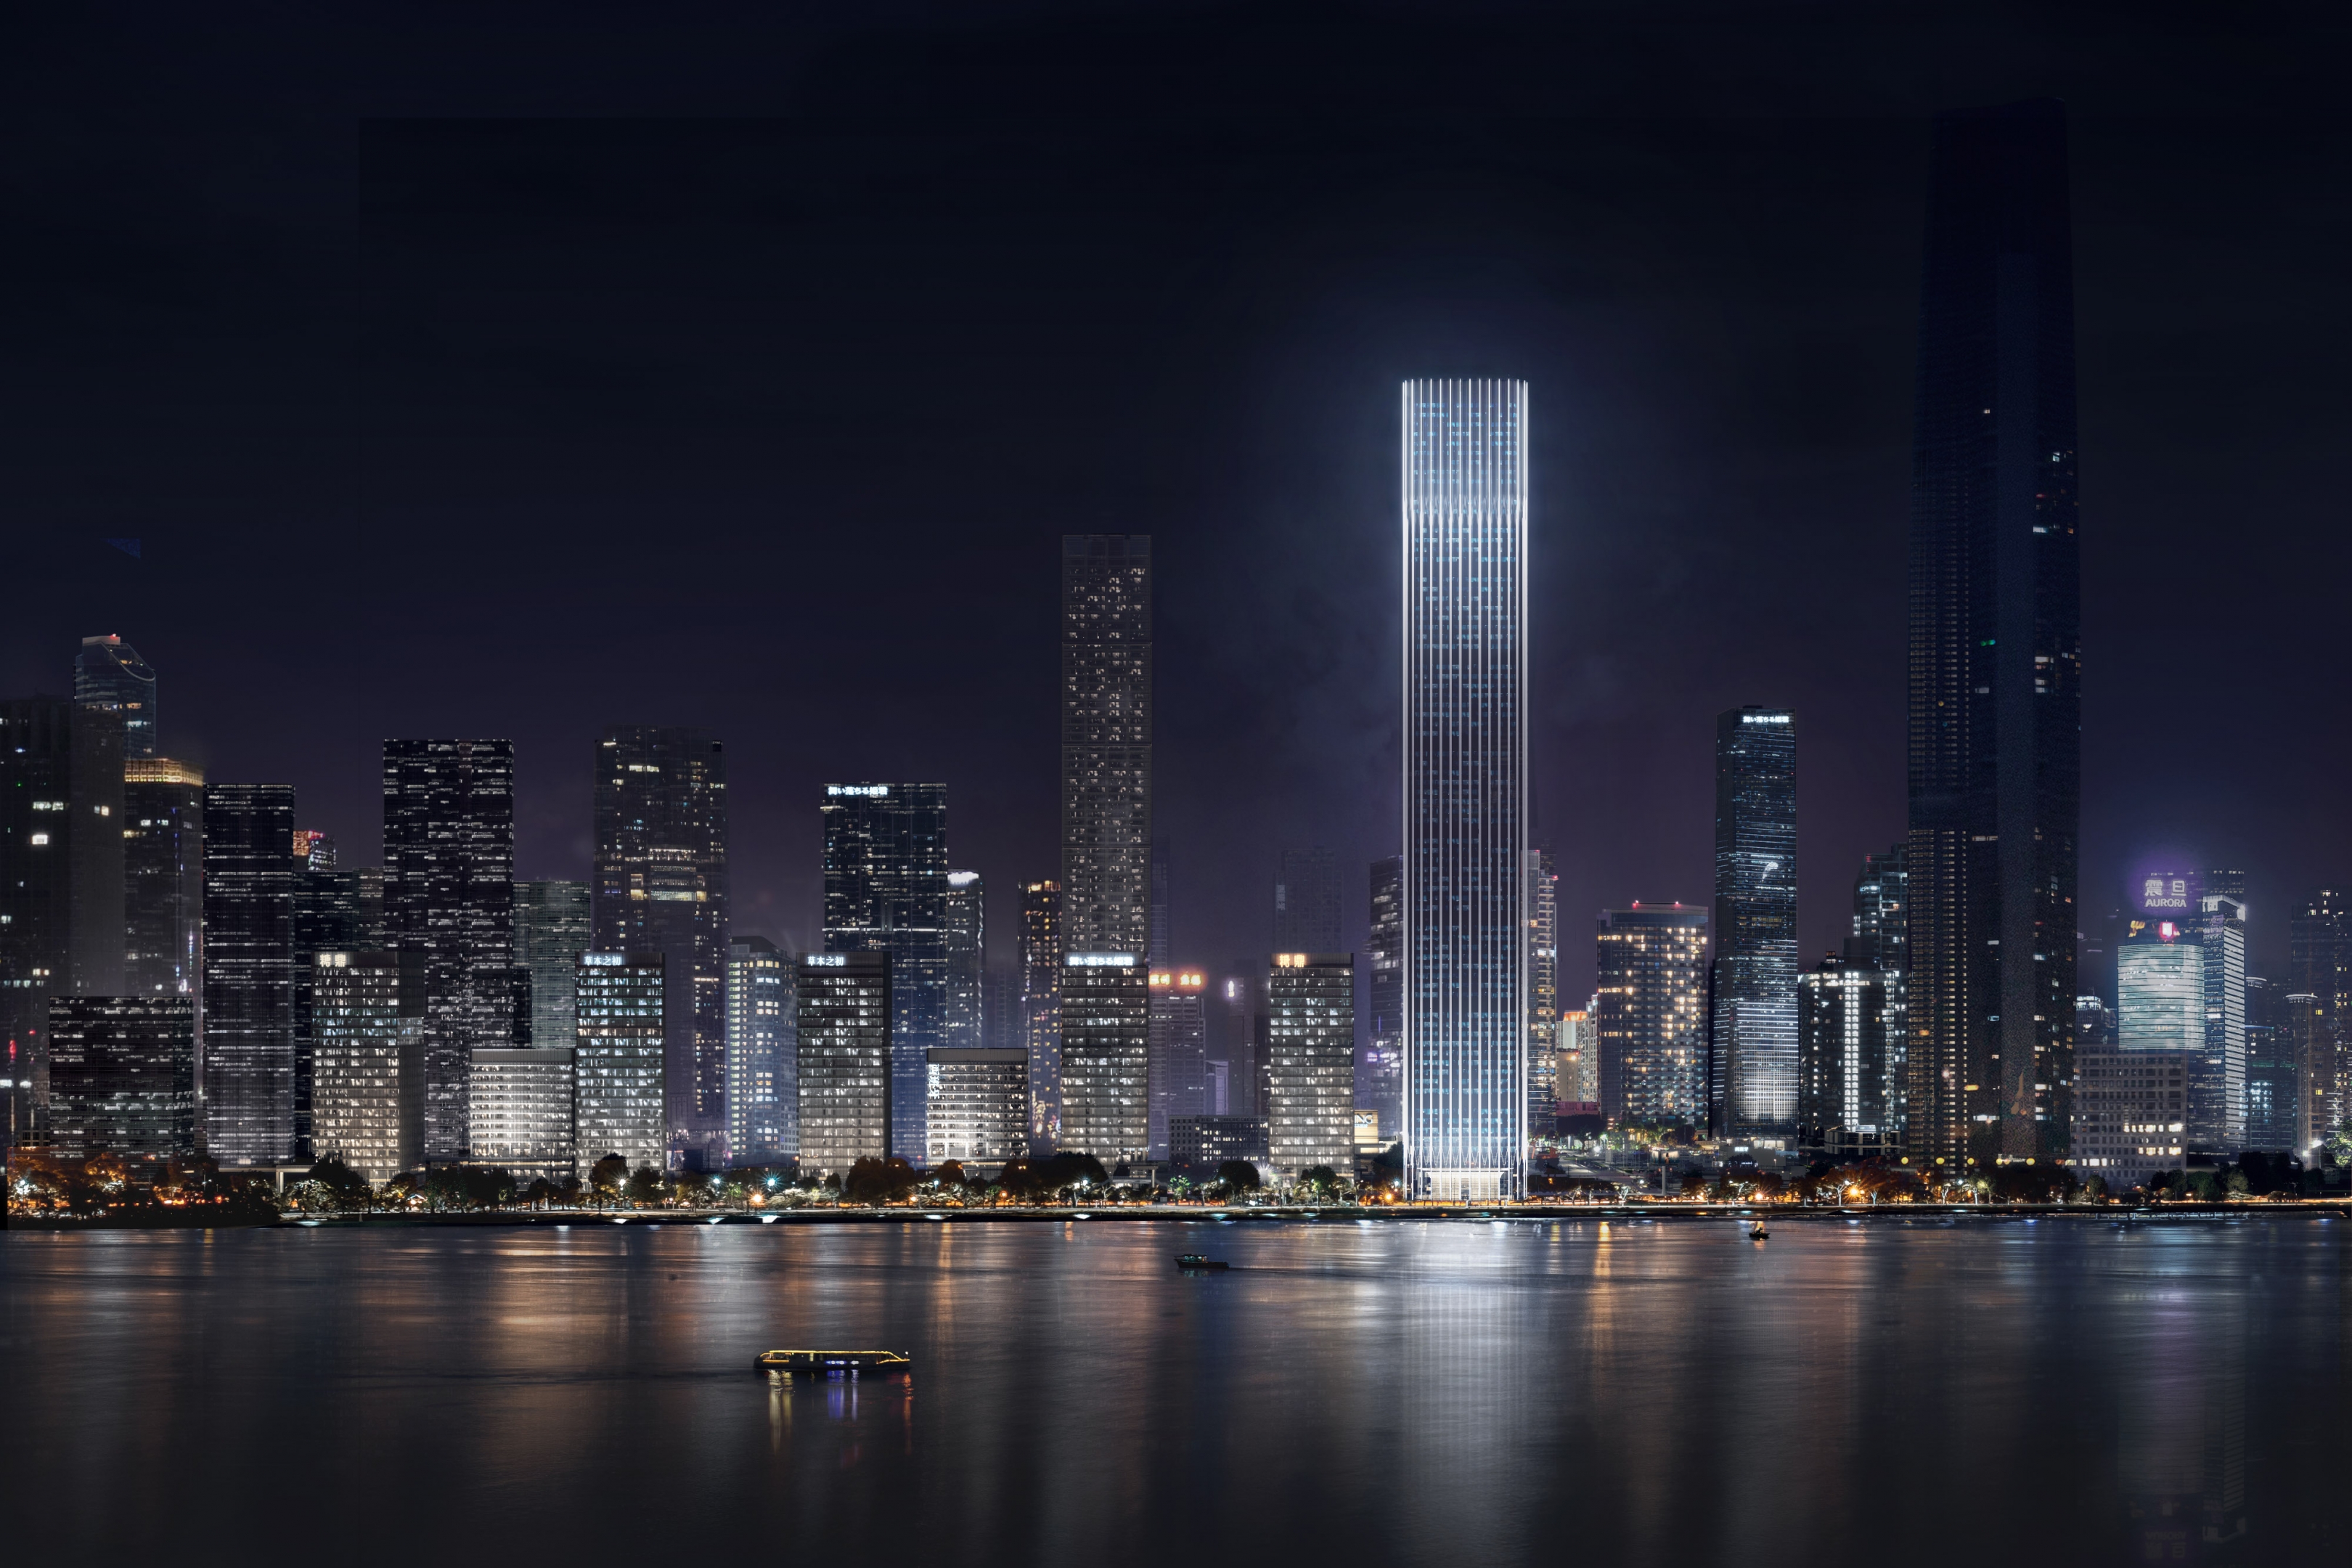 Architectural visualization of CFL Wuhan for KPF. An image shows a city with skyscrapers from distance with water in front. The image is from the ground view in the night time.